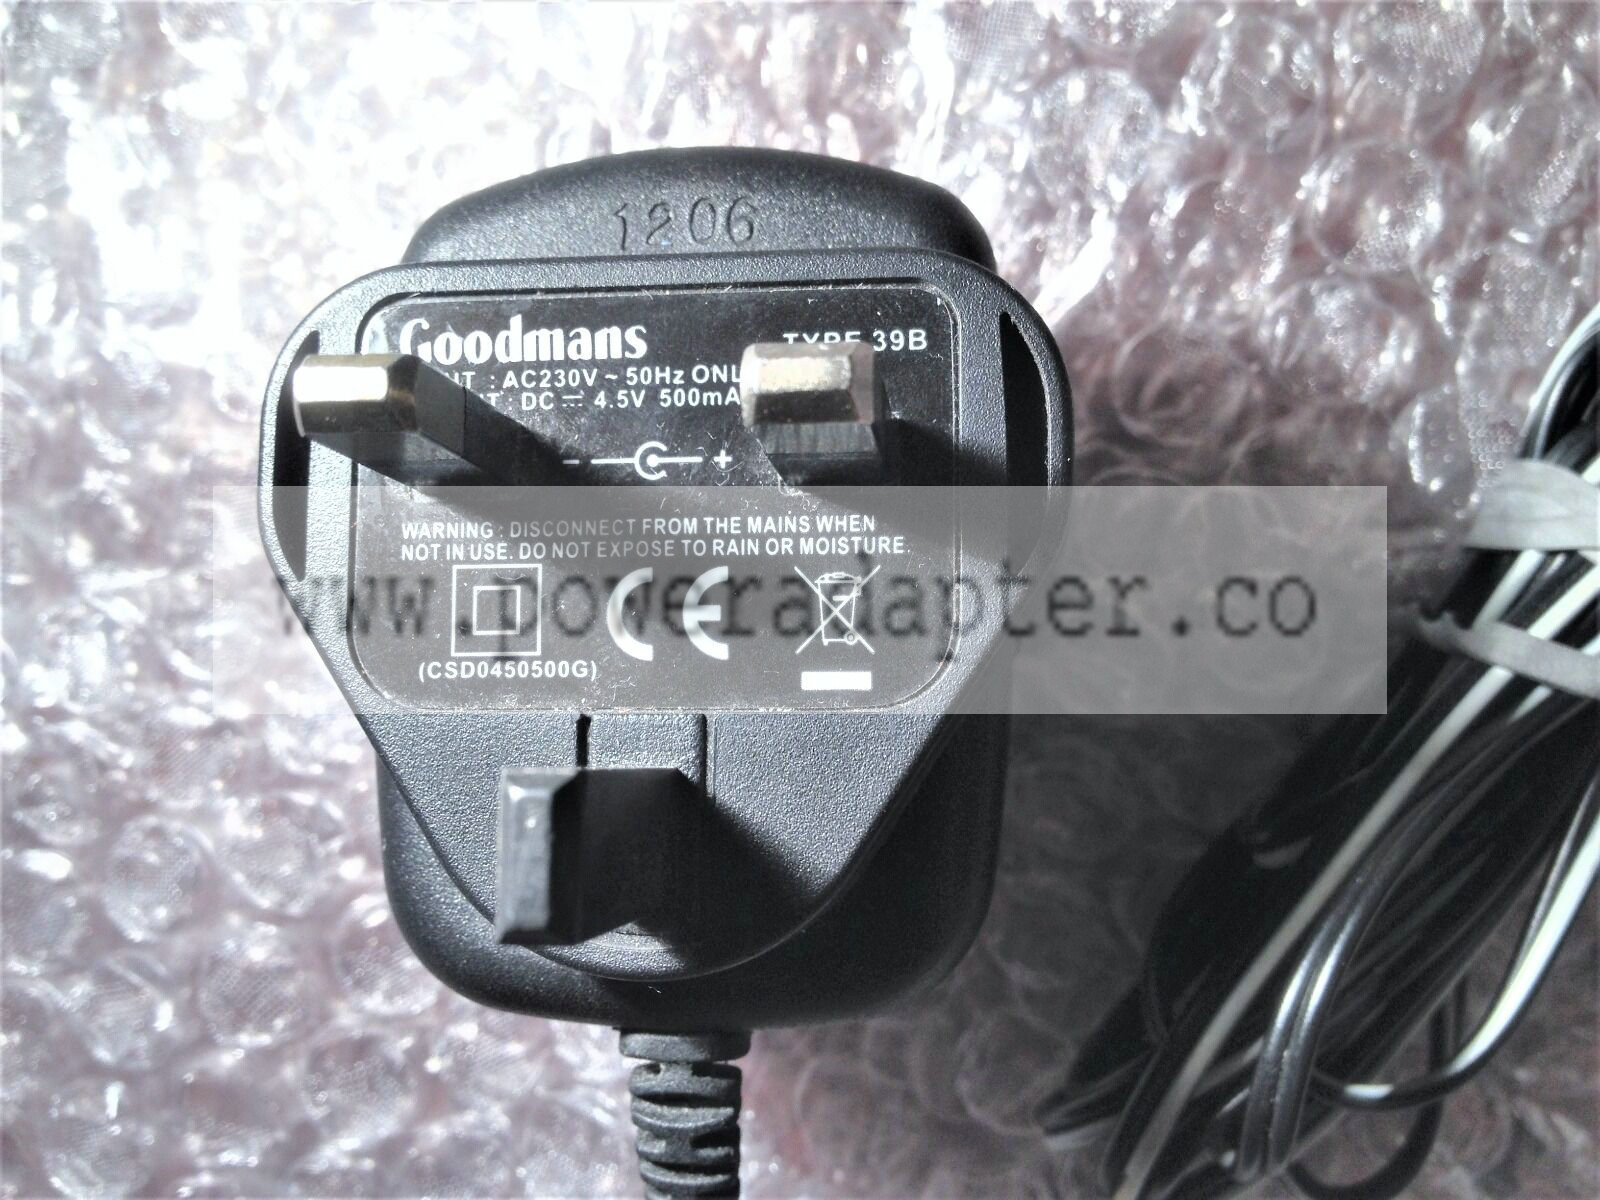 Goodmans Type 39b Charger / Power Adapter – 4.5v 500mA output – mains 3 pin UK Goodmans Type 39b Charger / Power Adap - Click Image to Close